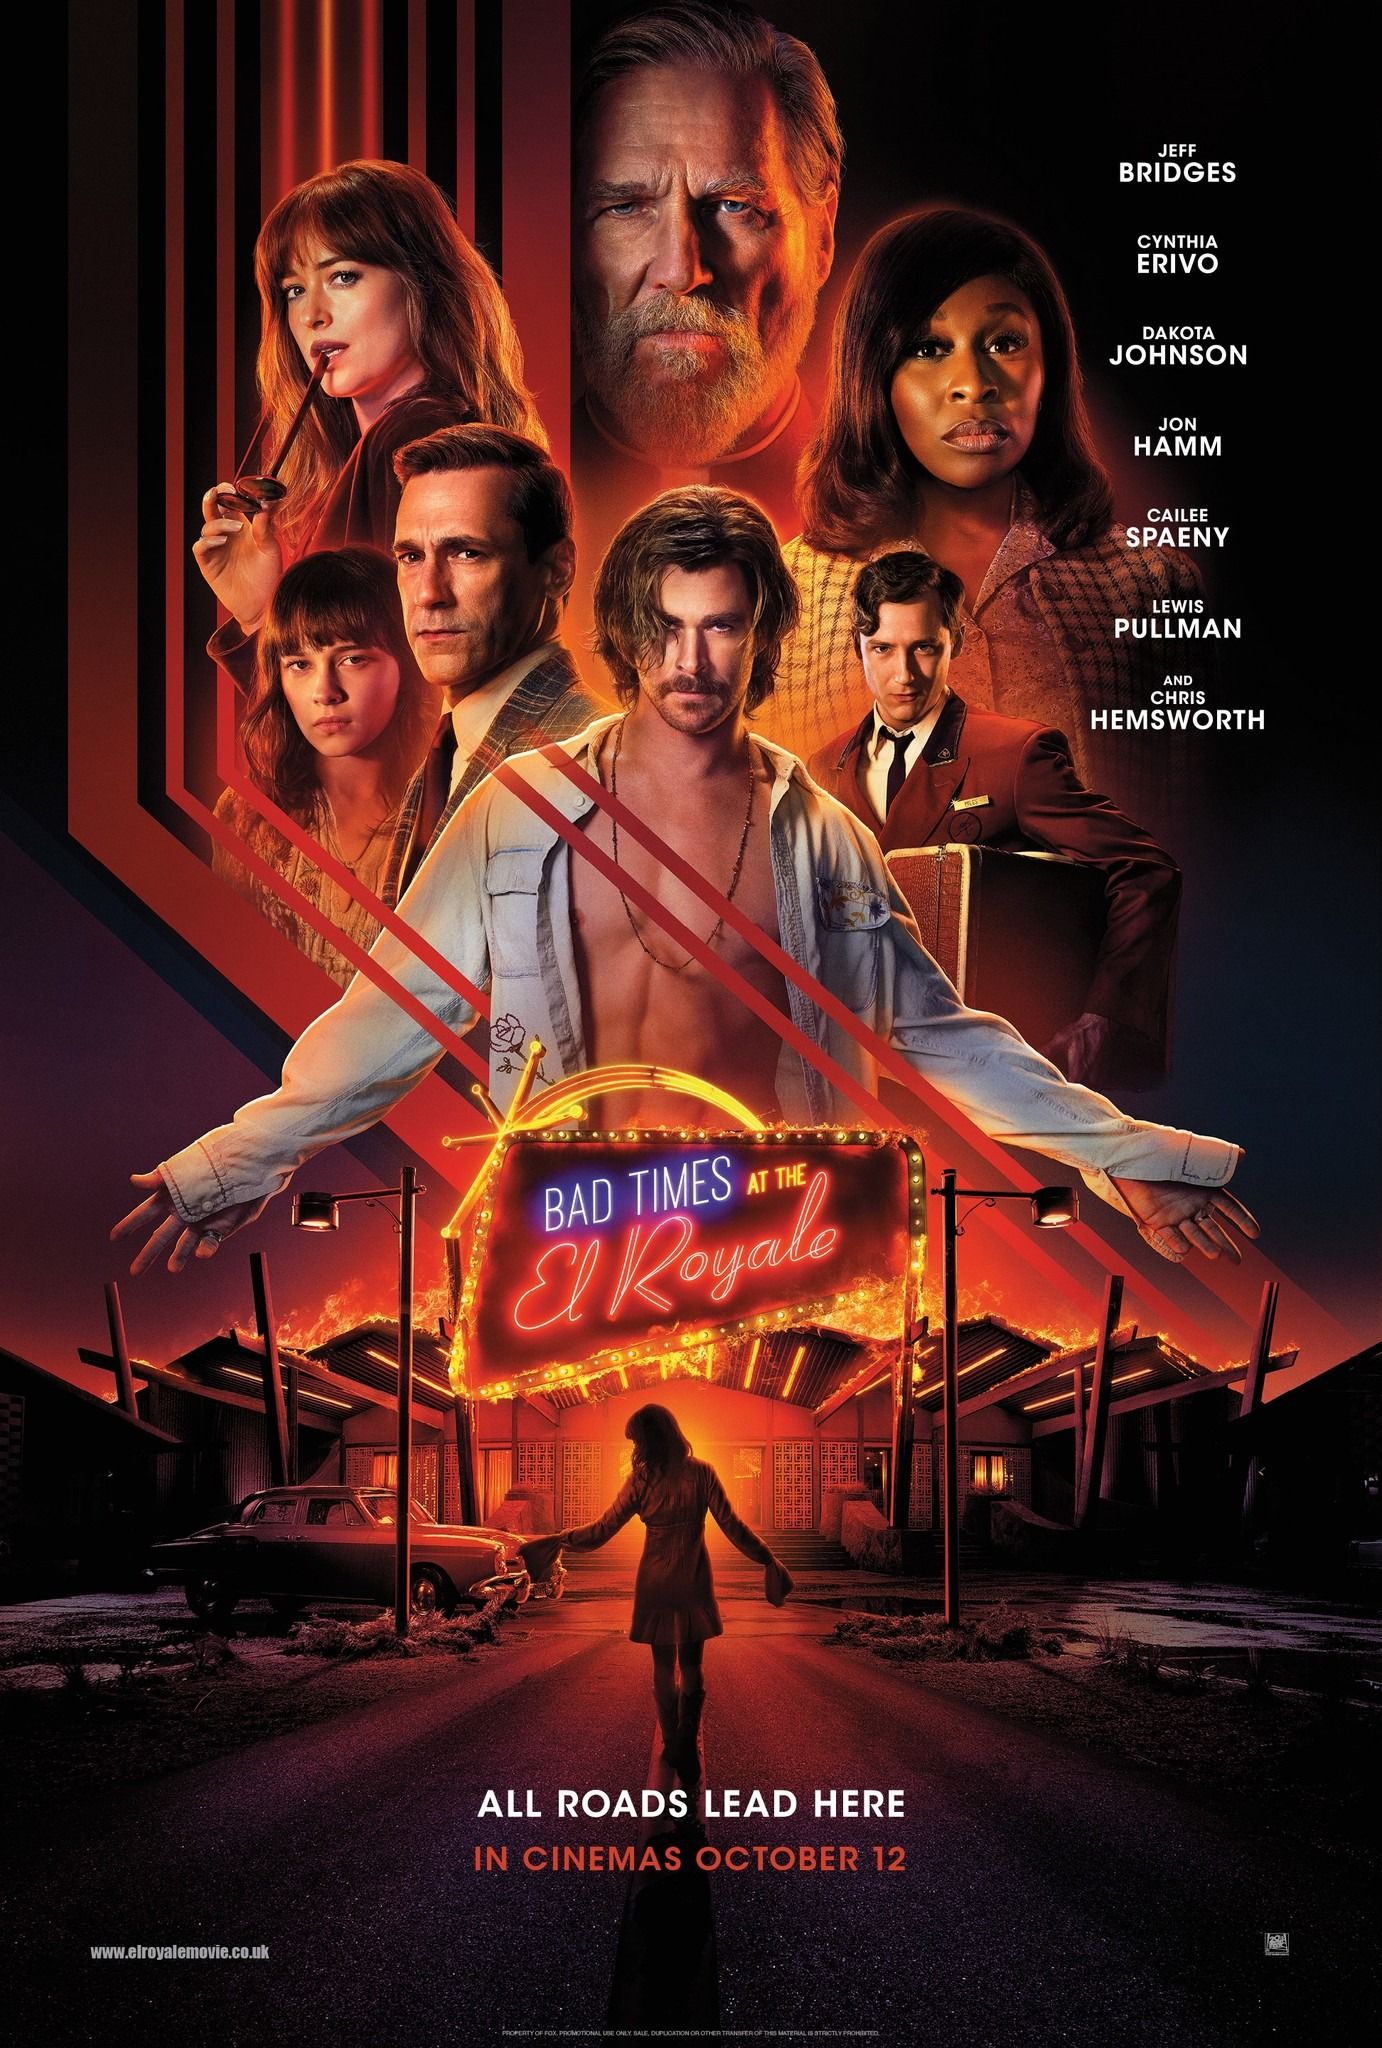 Bad Times at the El Royale Trailer #2: Don’t Trust Anyone